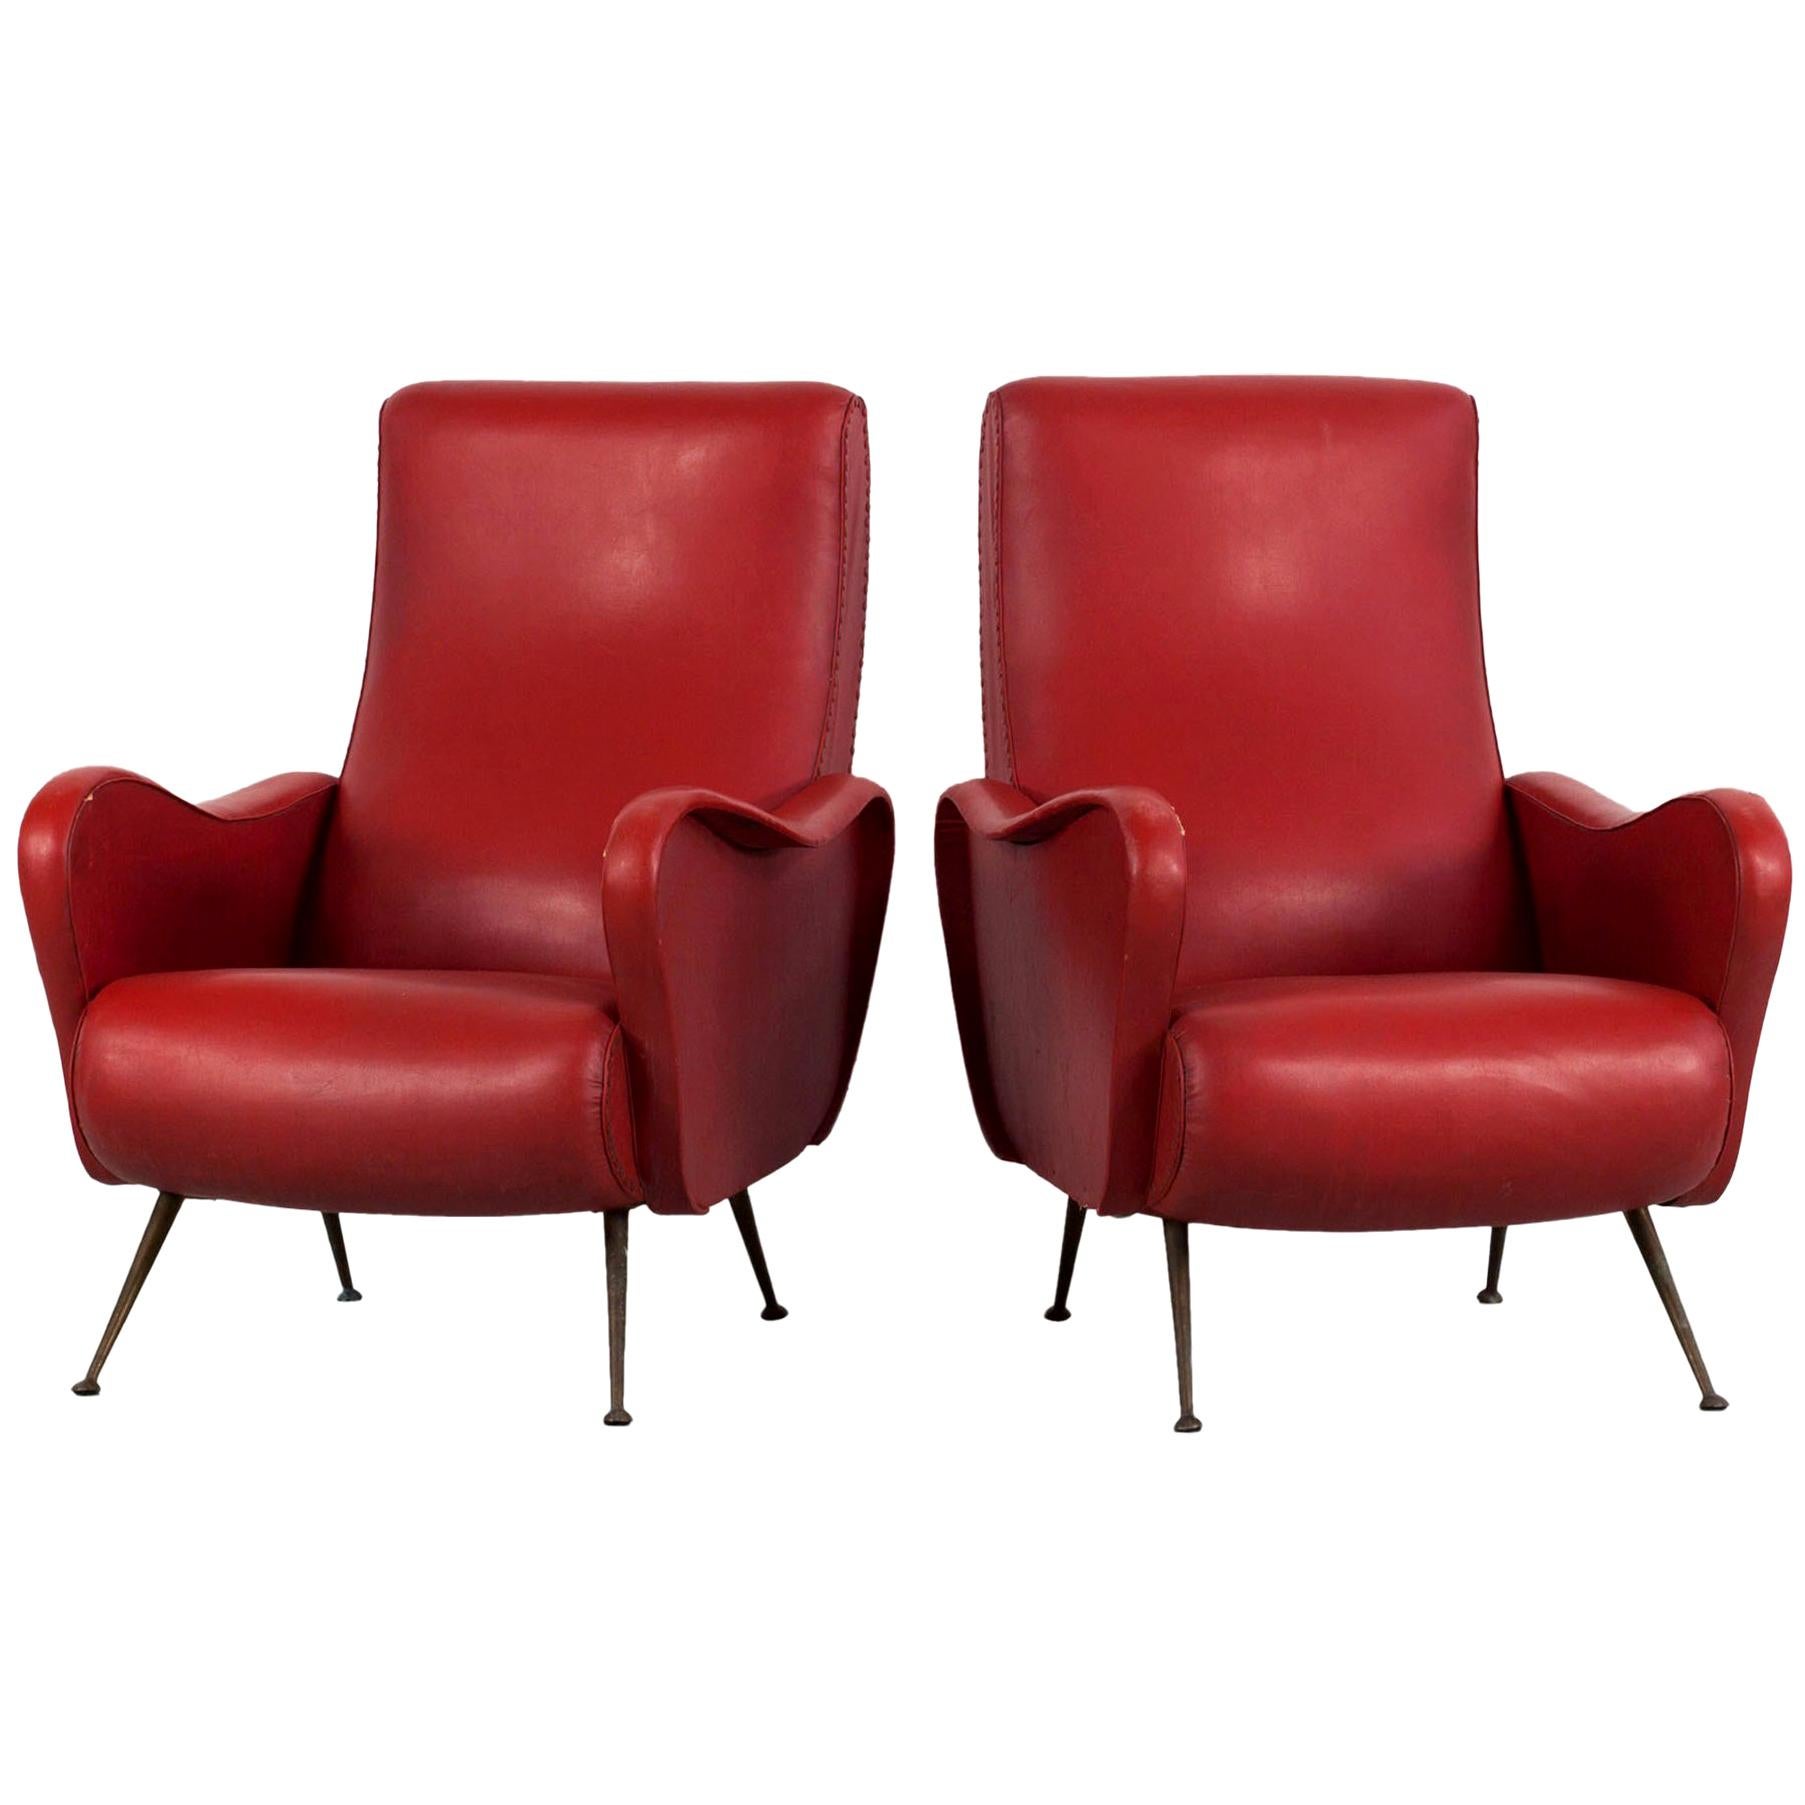 Set of Two Italian Red Faux Leather Armchairs with Brass Legs, 1950s